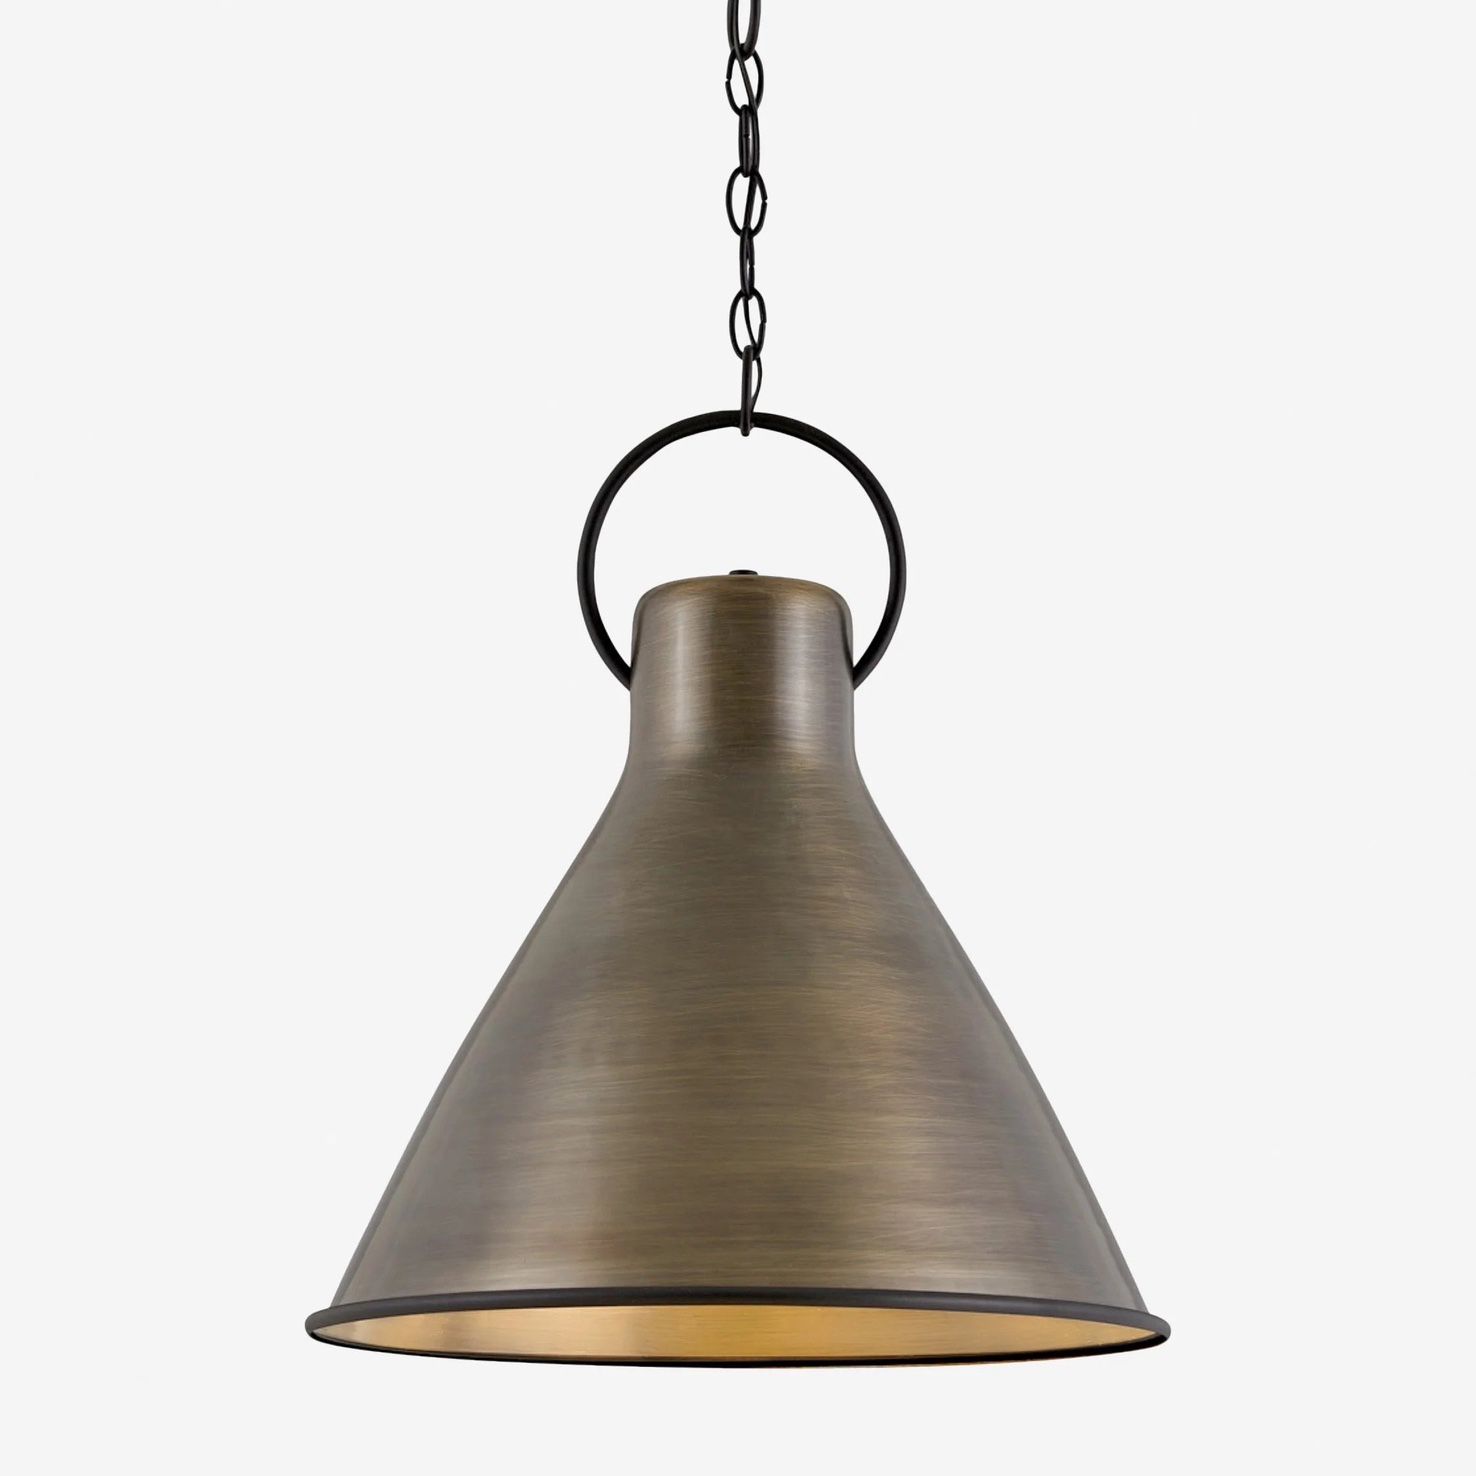 Rustic Antique Brass Whatley Pendant Light Oversized Ring